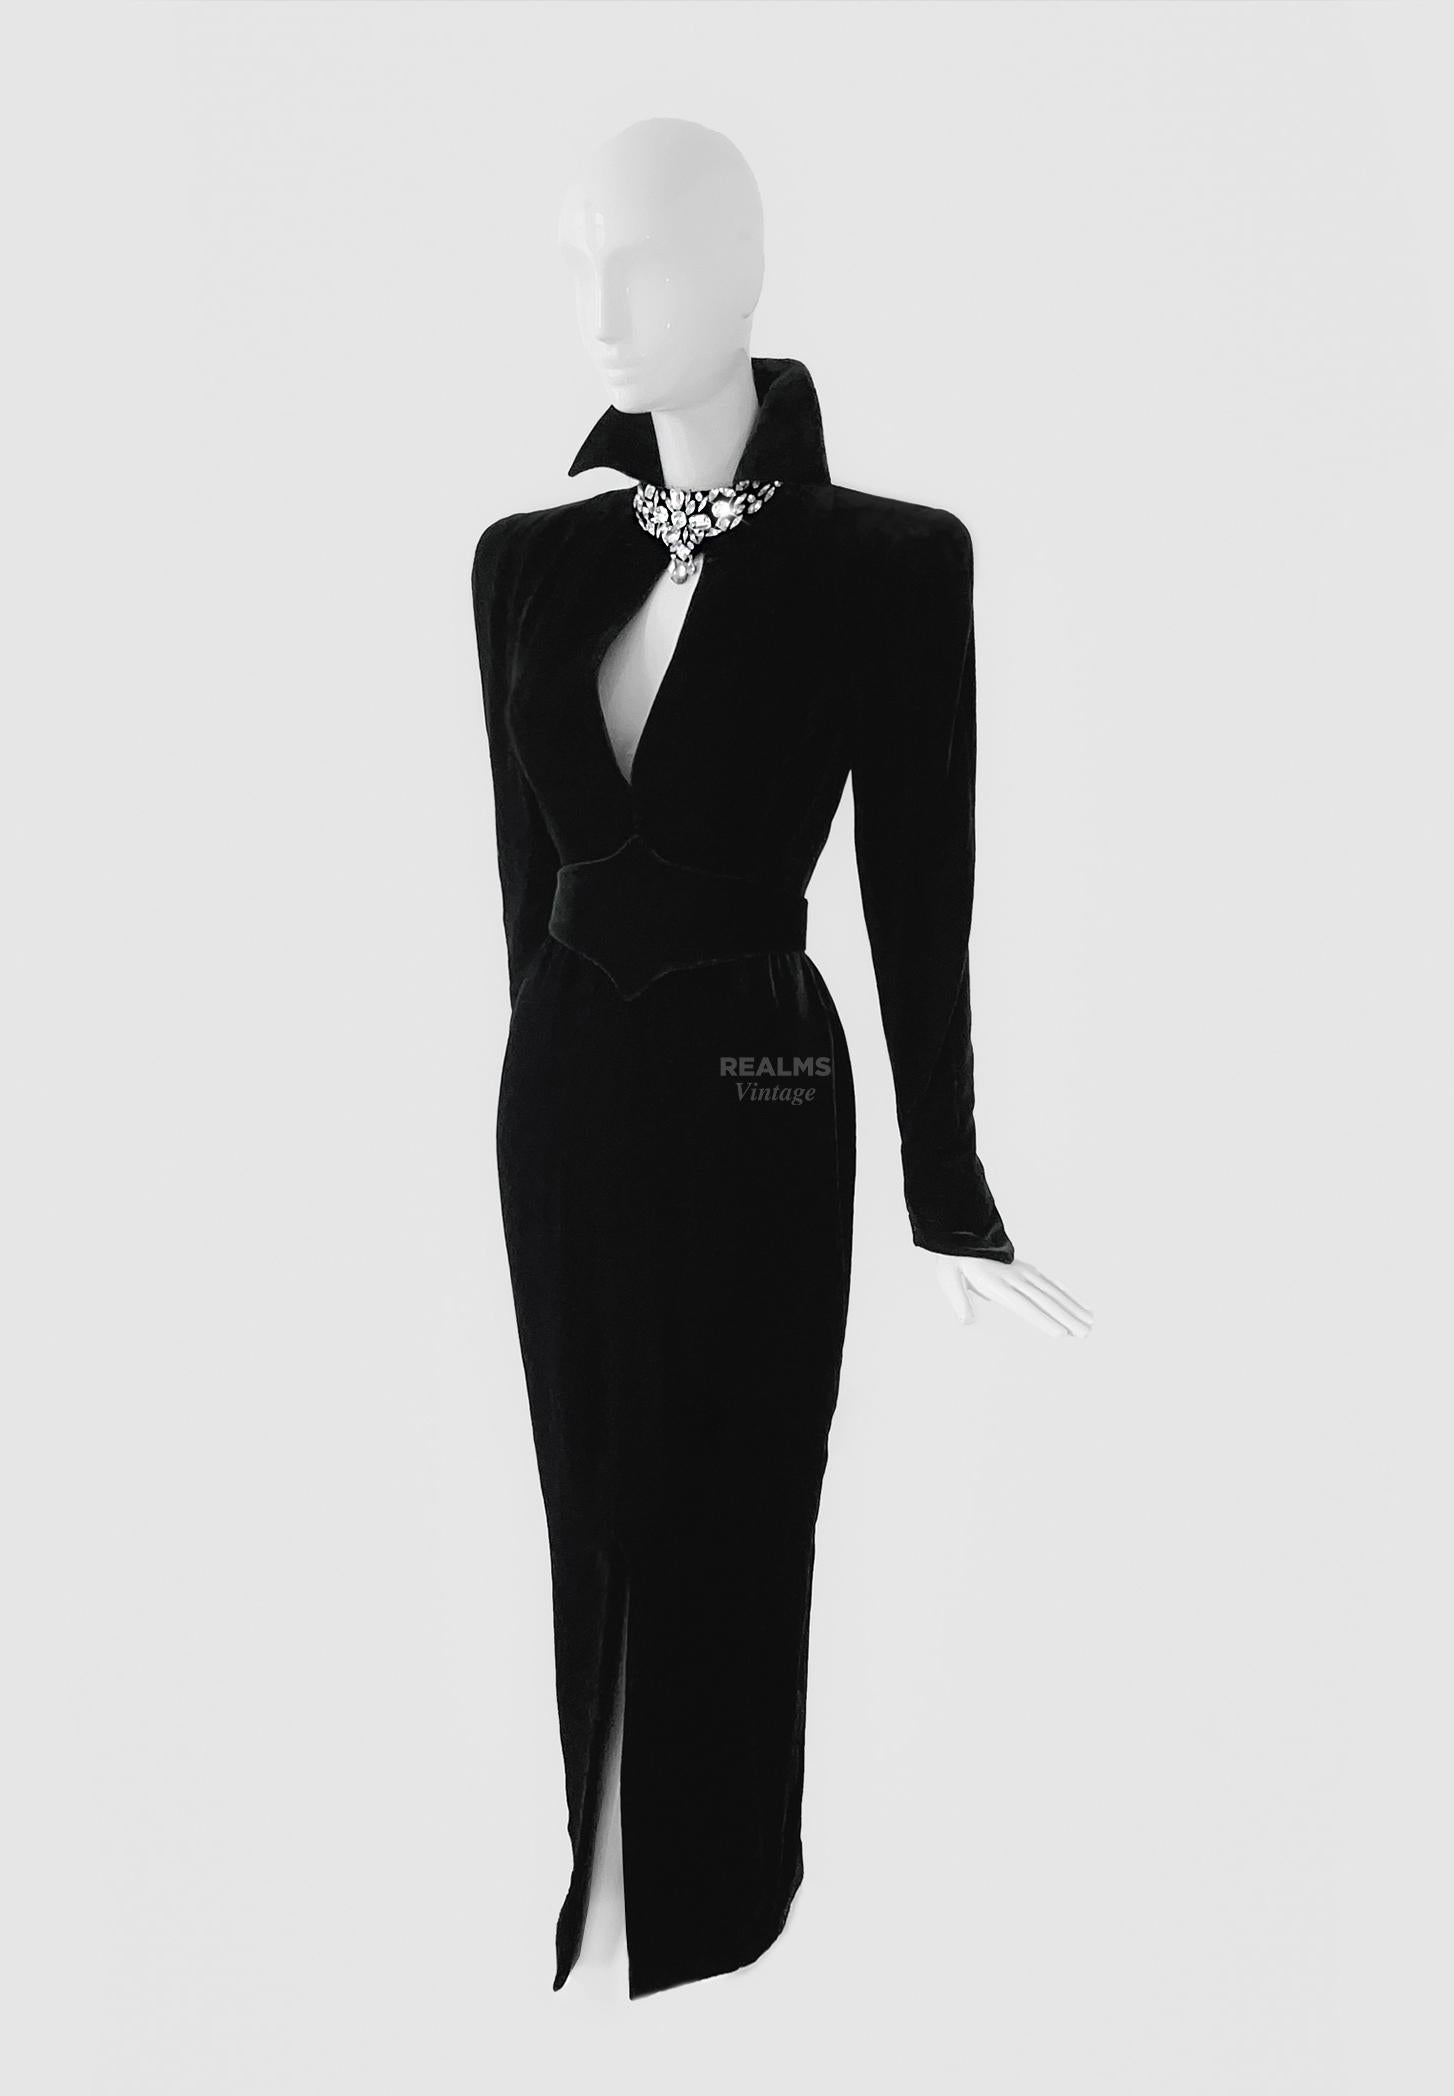 Stunning Thierry Mugler Archival  FW 1986 Evening Gown Crytsal Black Dress  For Sale